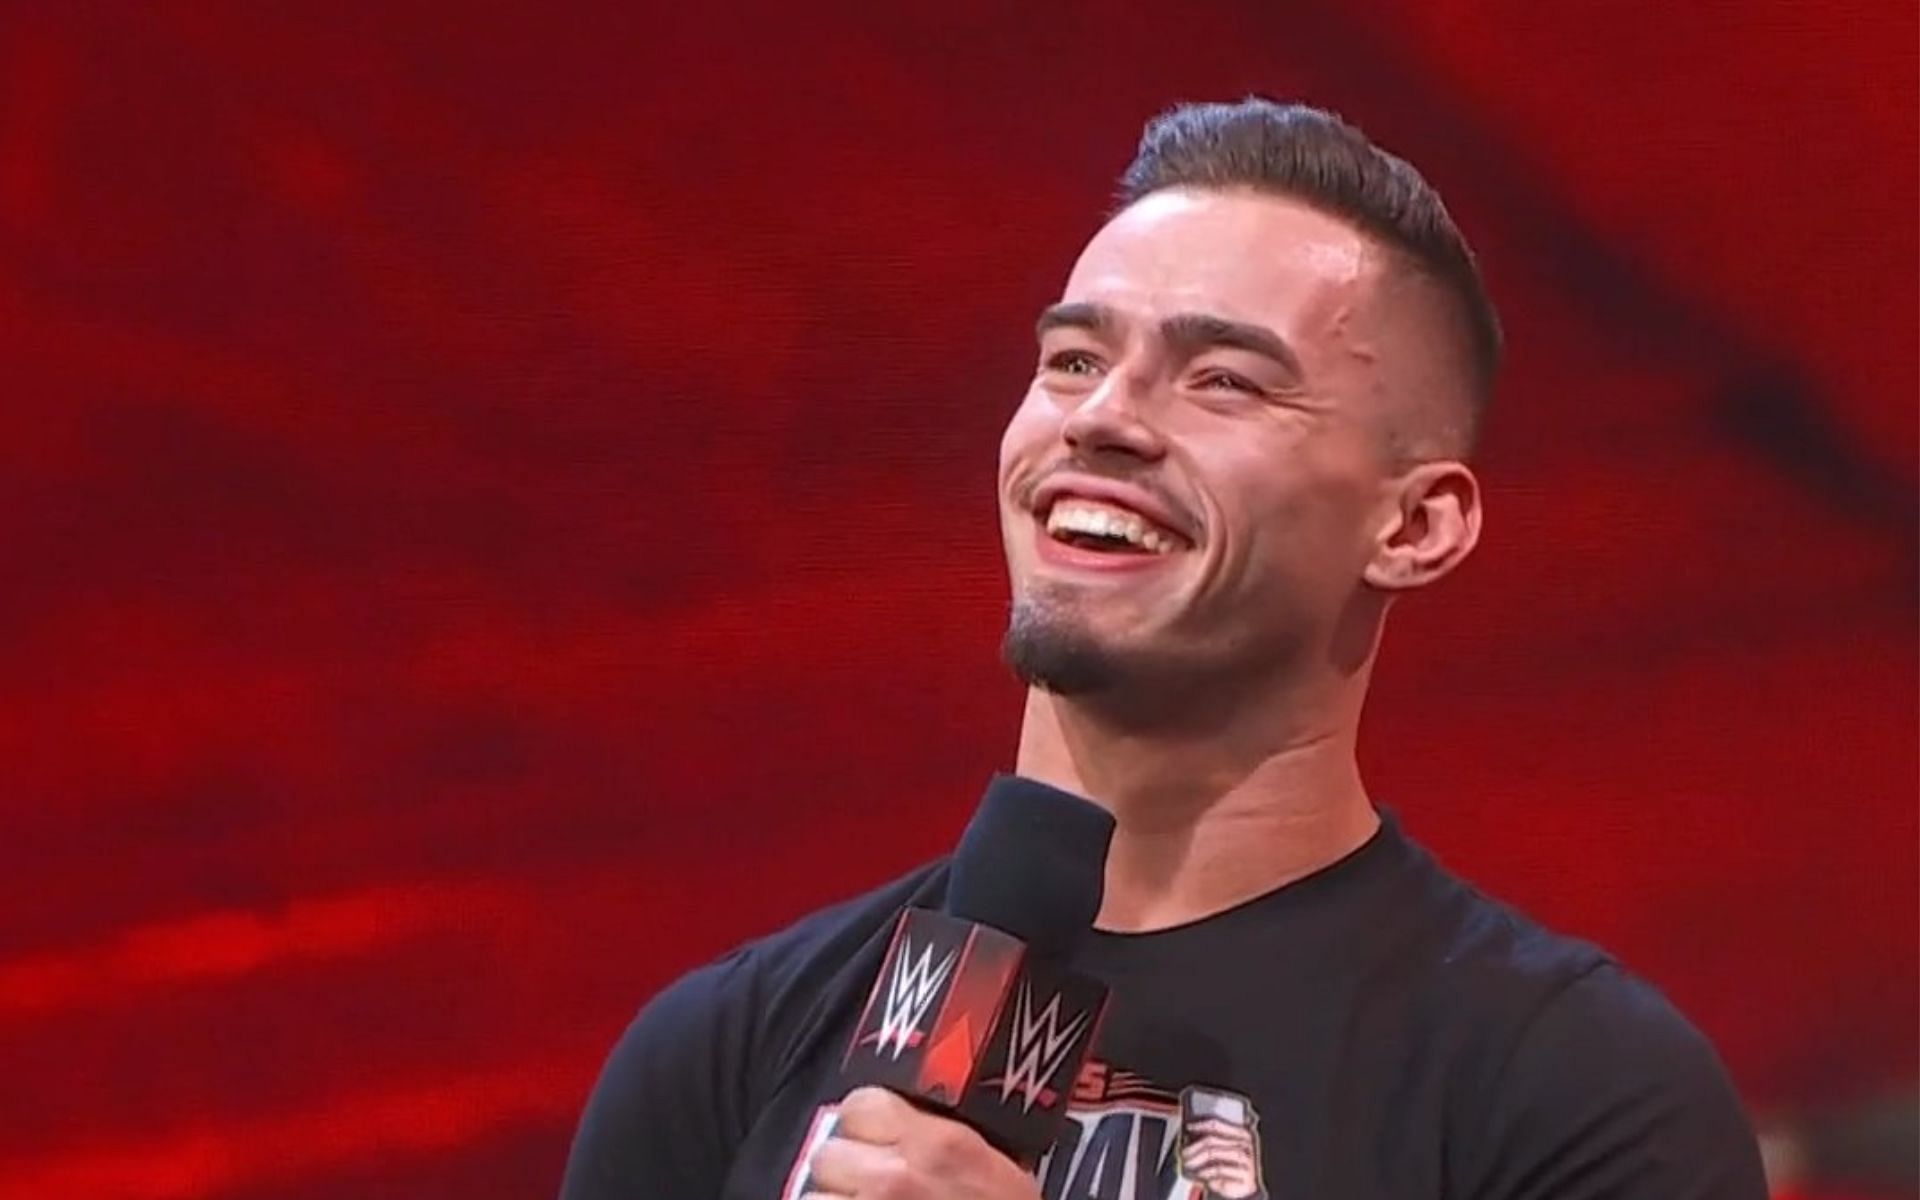 The 24-year-old star lost in the main event of RAW